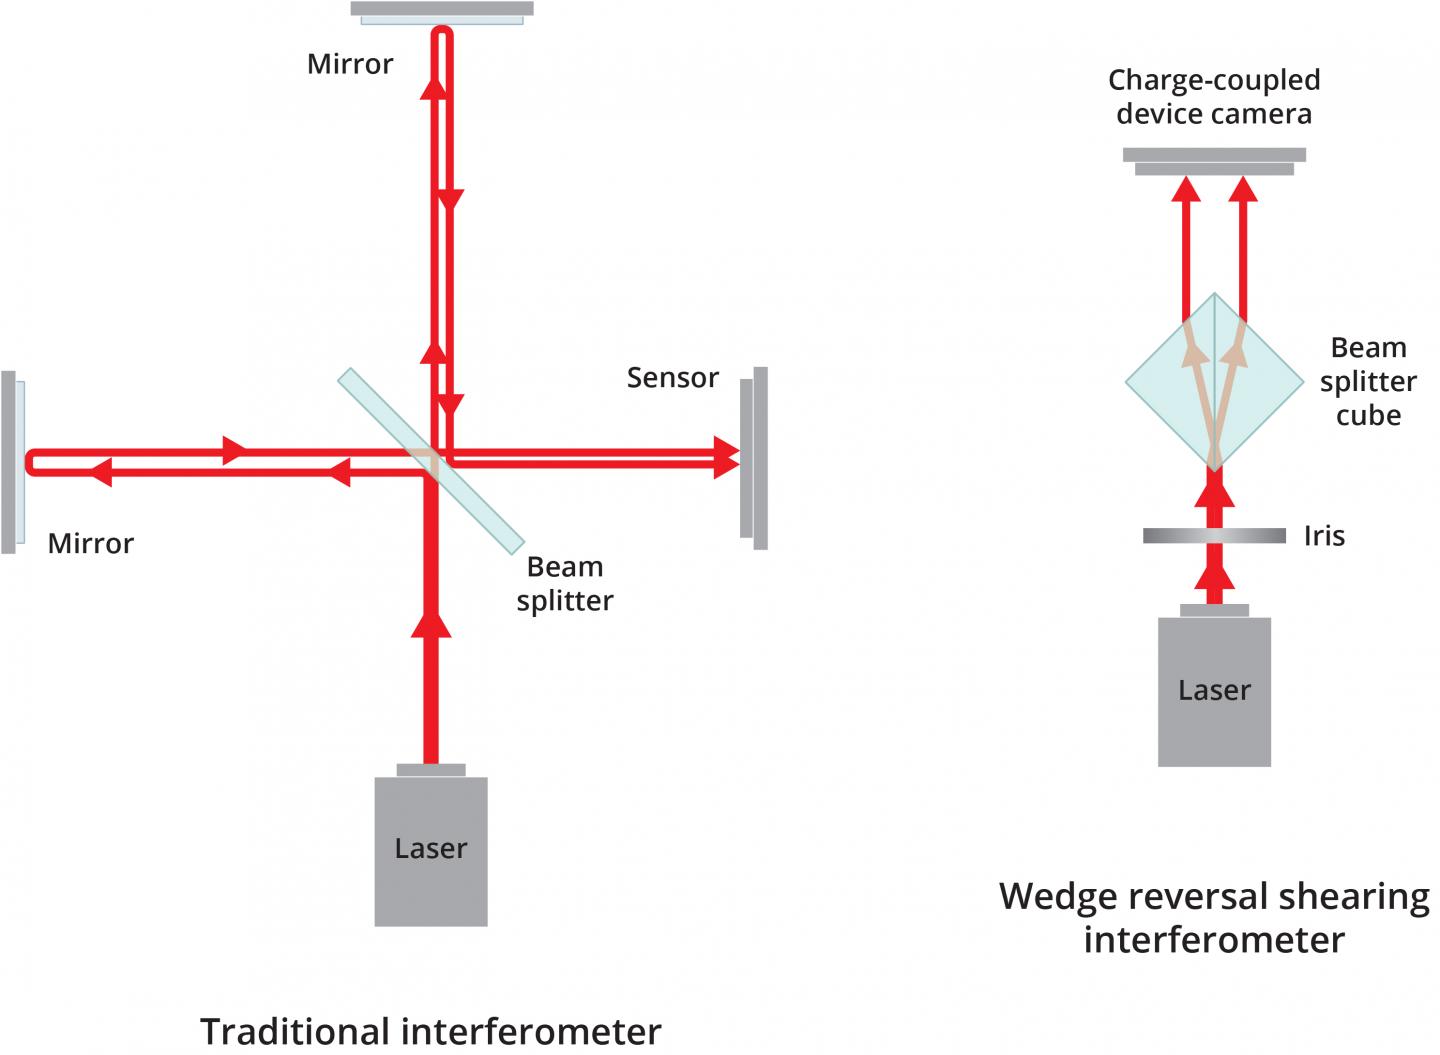 Comparison with Traditional Interferometers